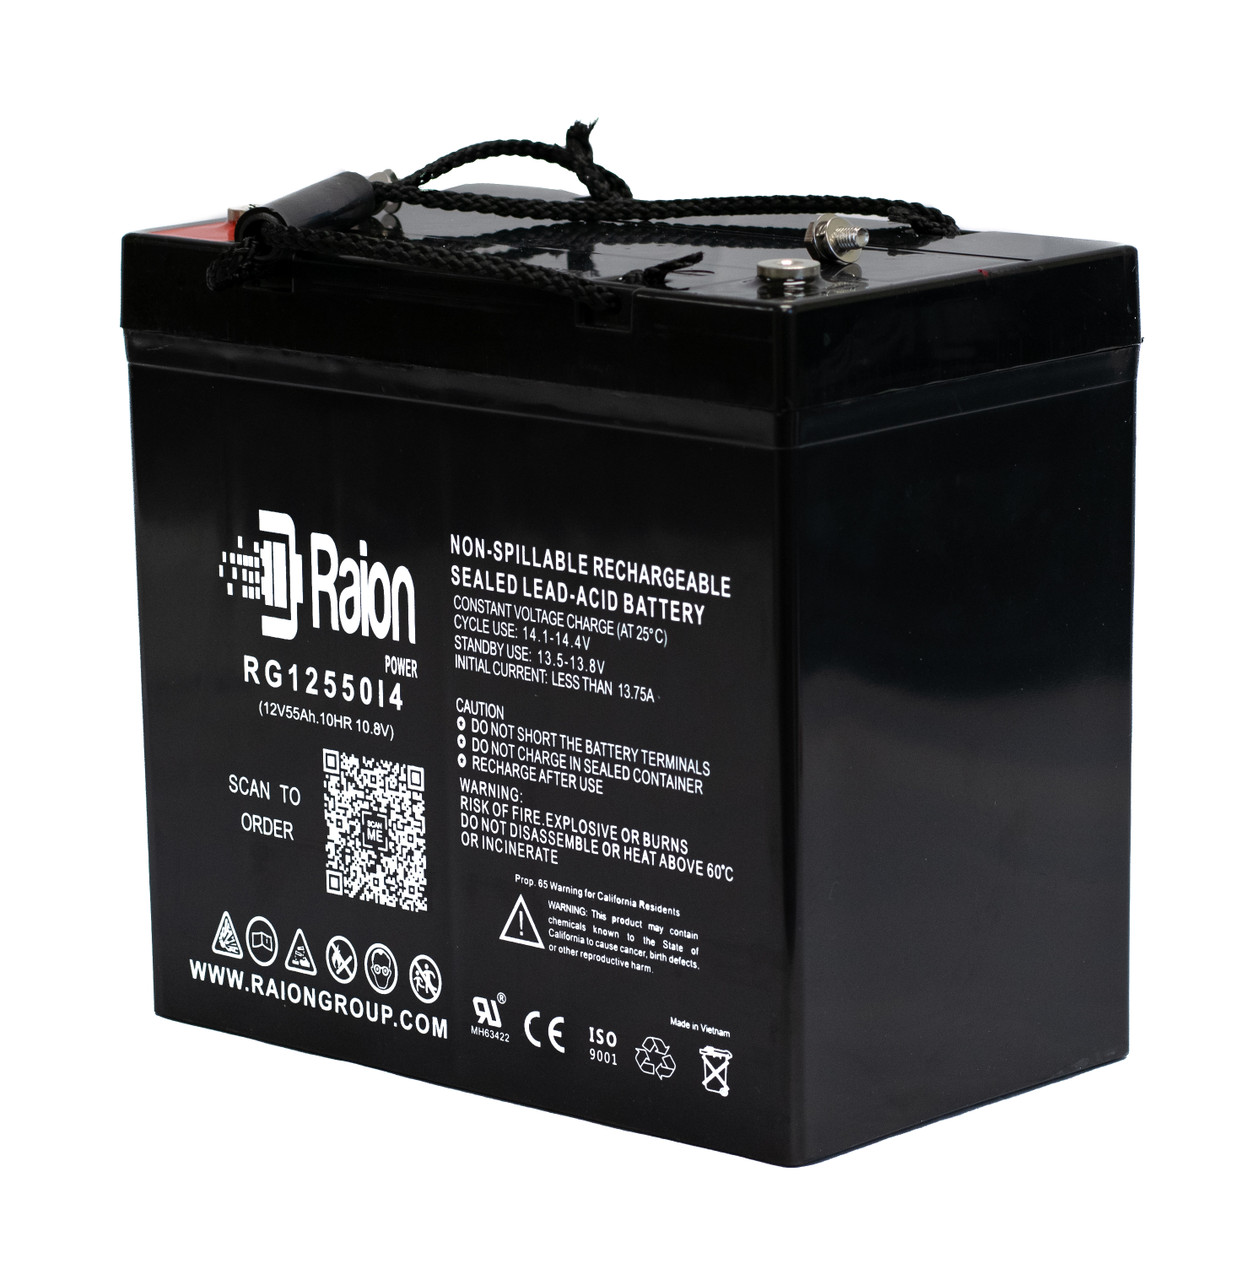 Raion Power 12V 55Ah 22NF Mobility Scooter Battery Replacement for Fortress Scientific 760